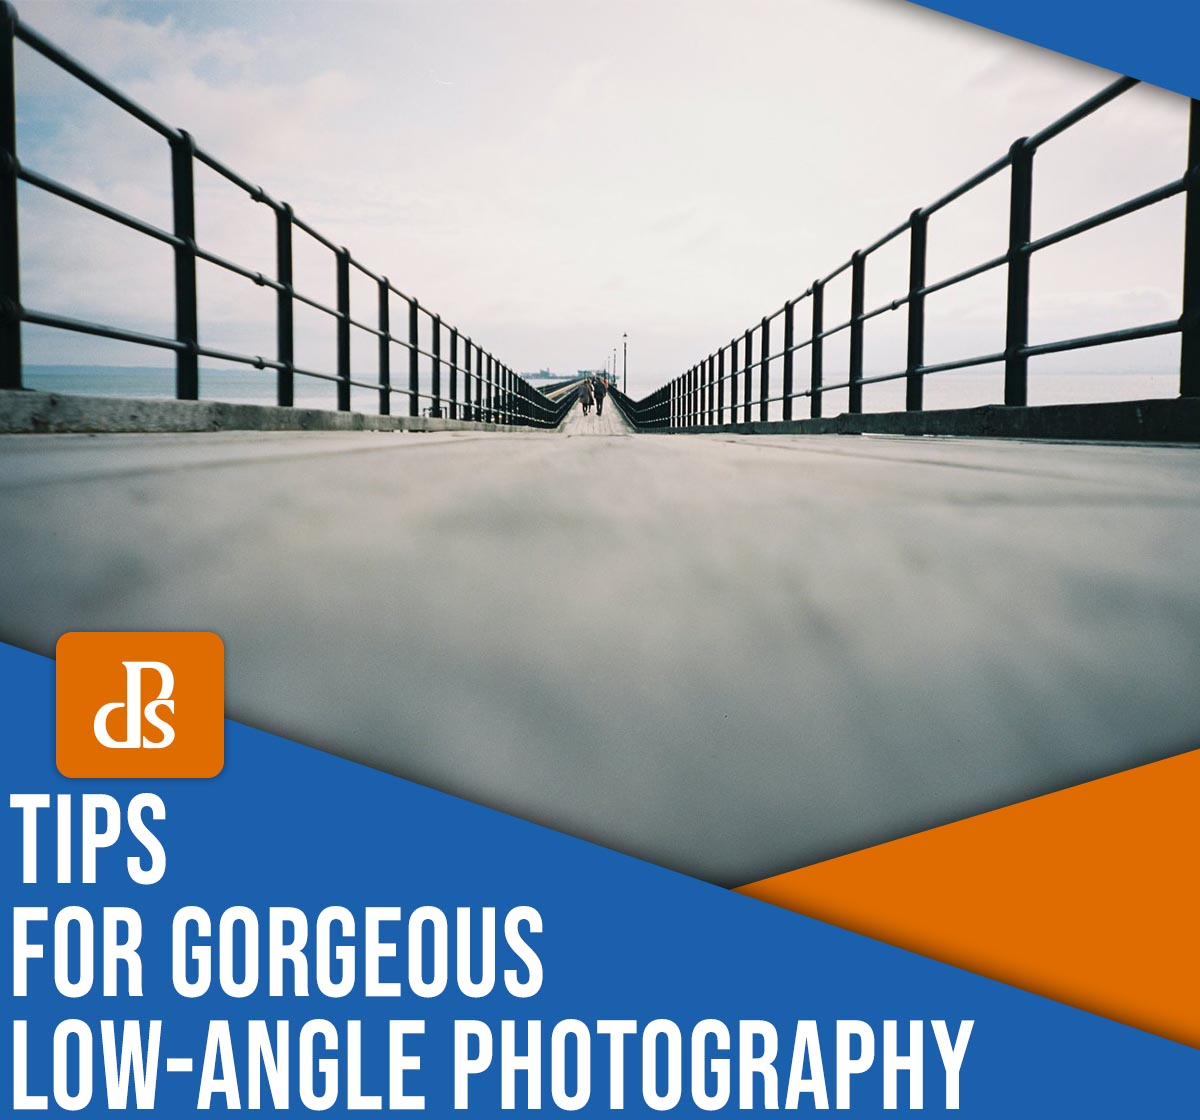 Tips for gorgeous low-angle photography